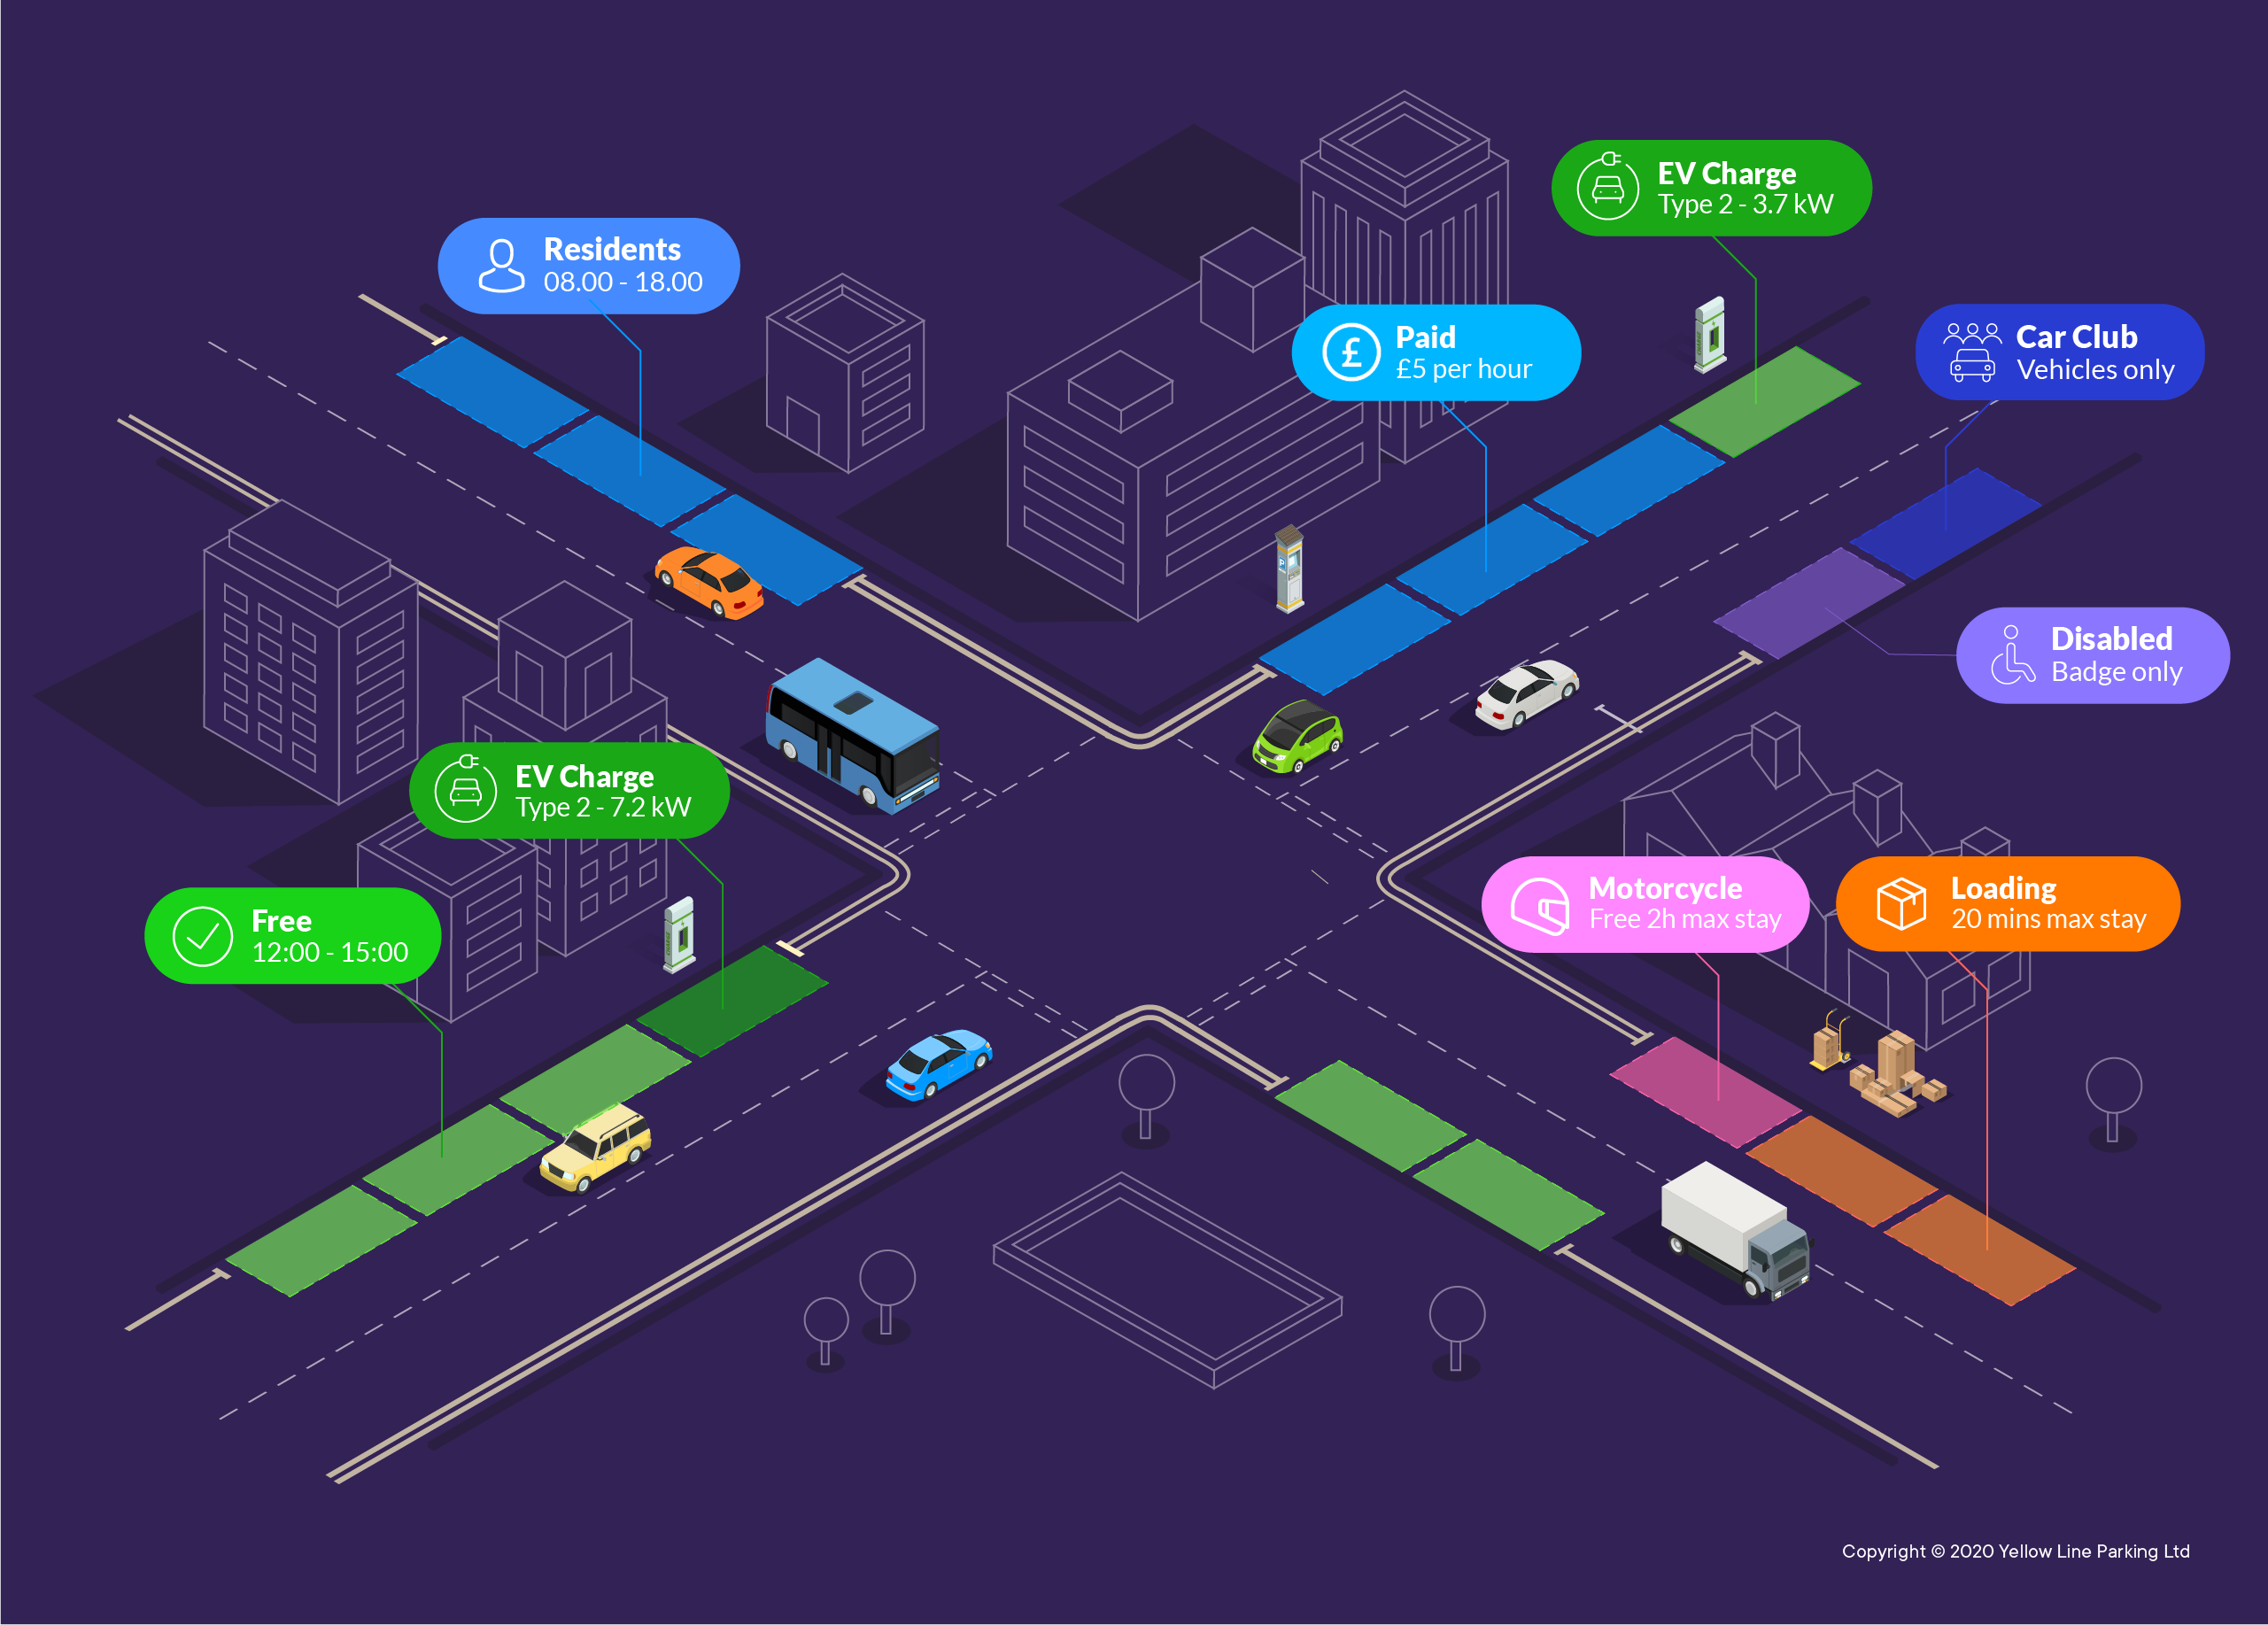 AppyWay set to transform journeys for UK drivers with the launch of new Parking API